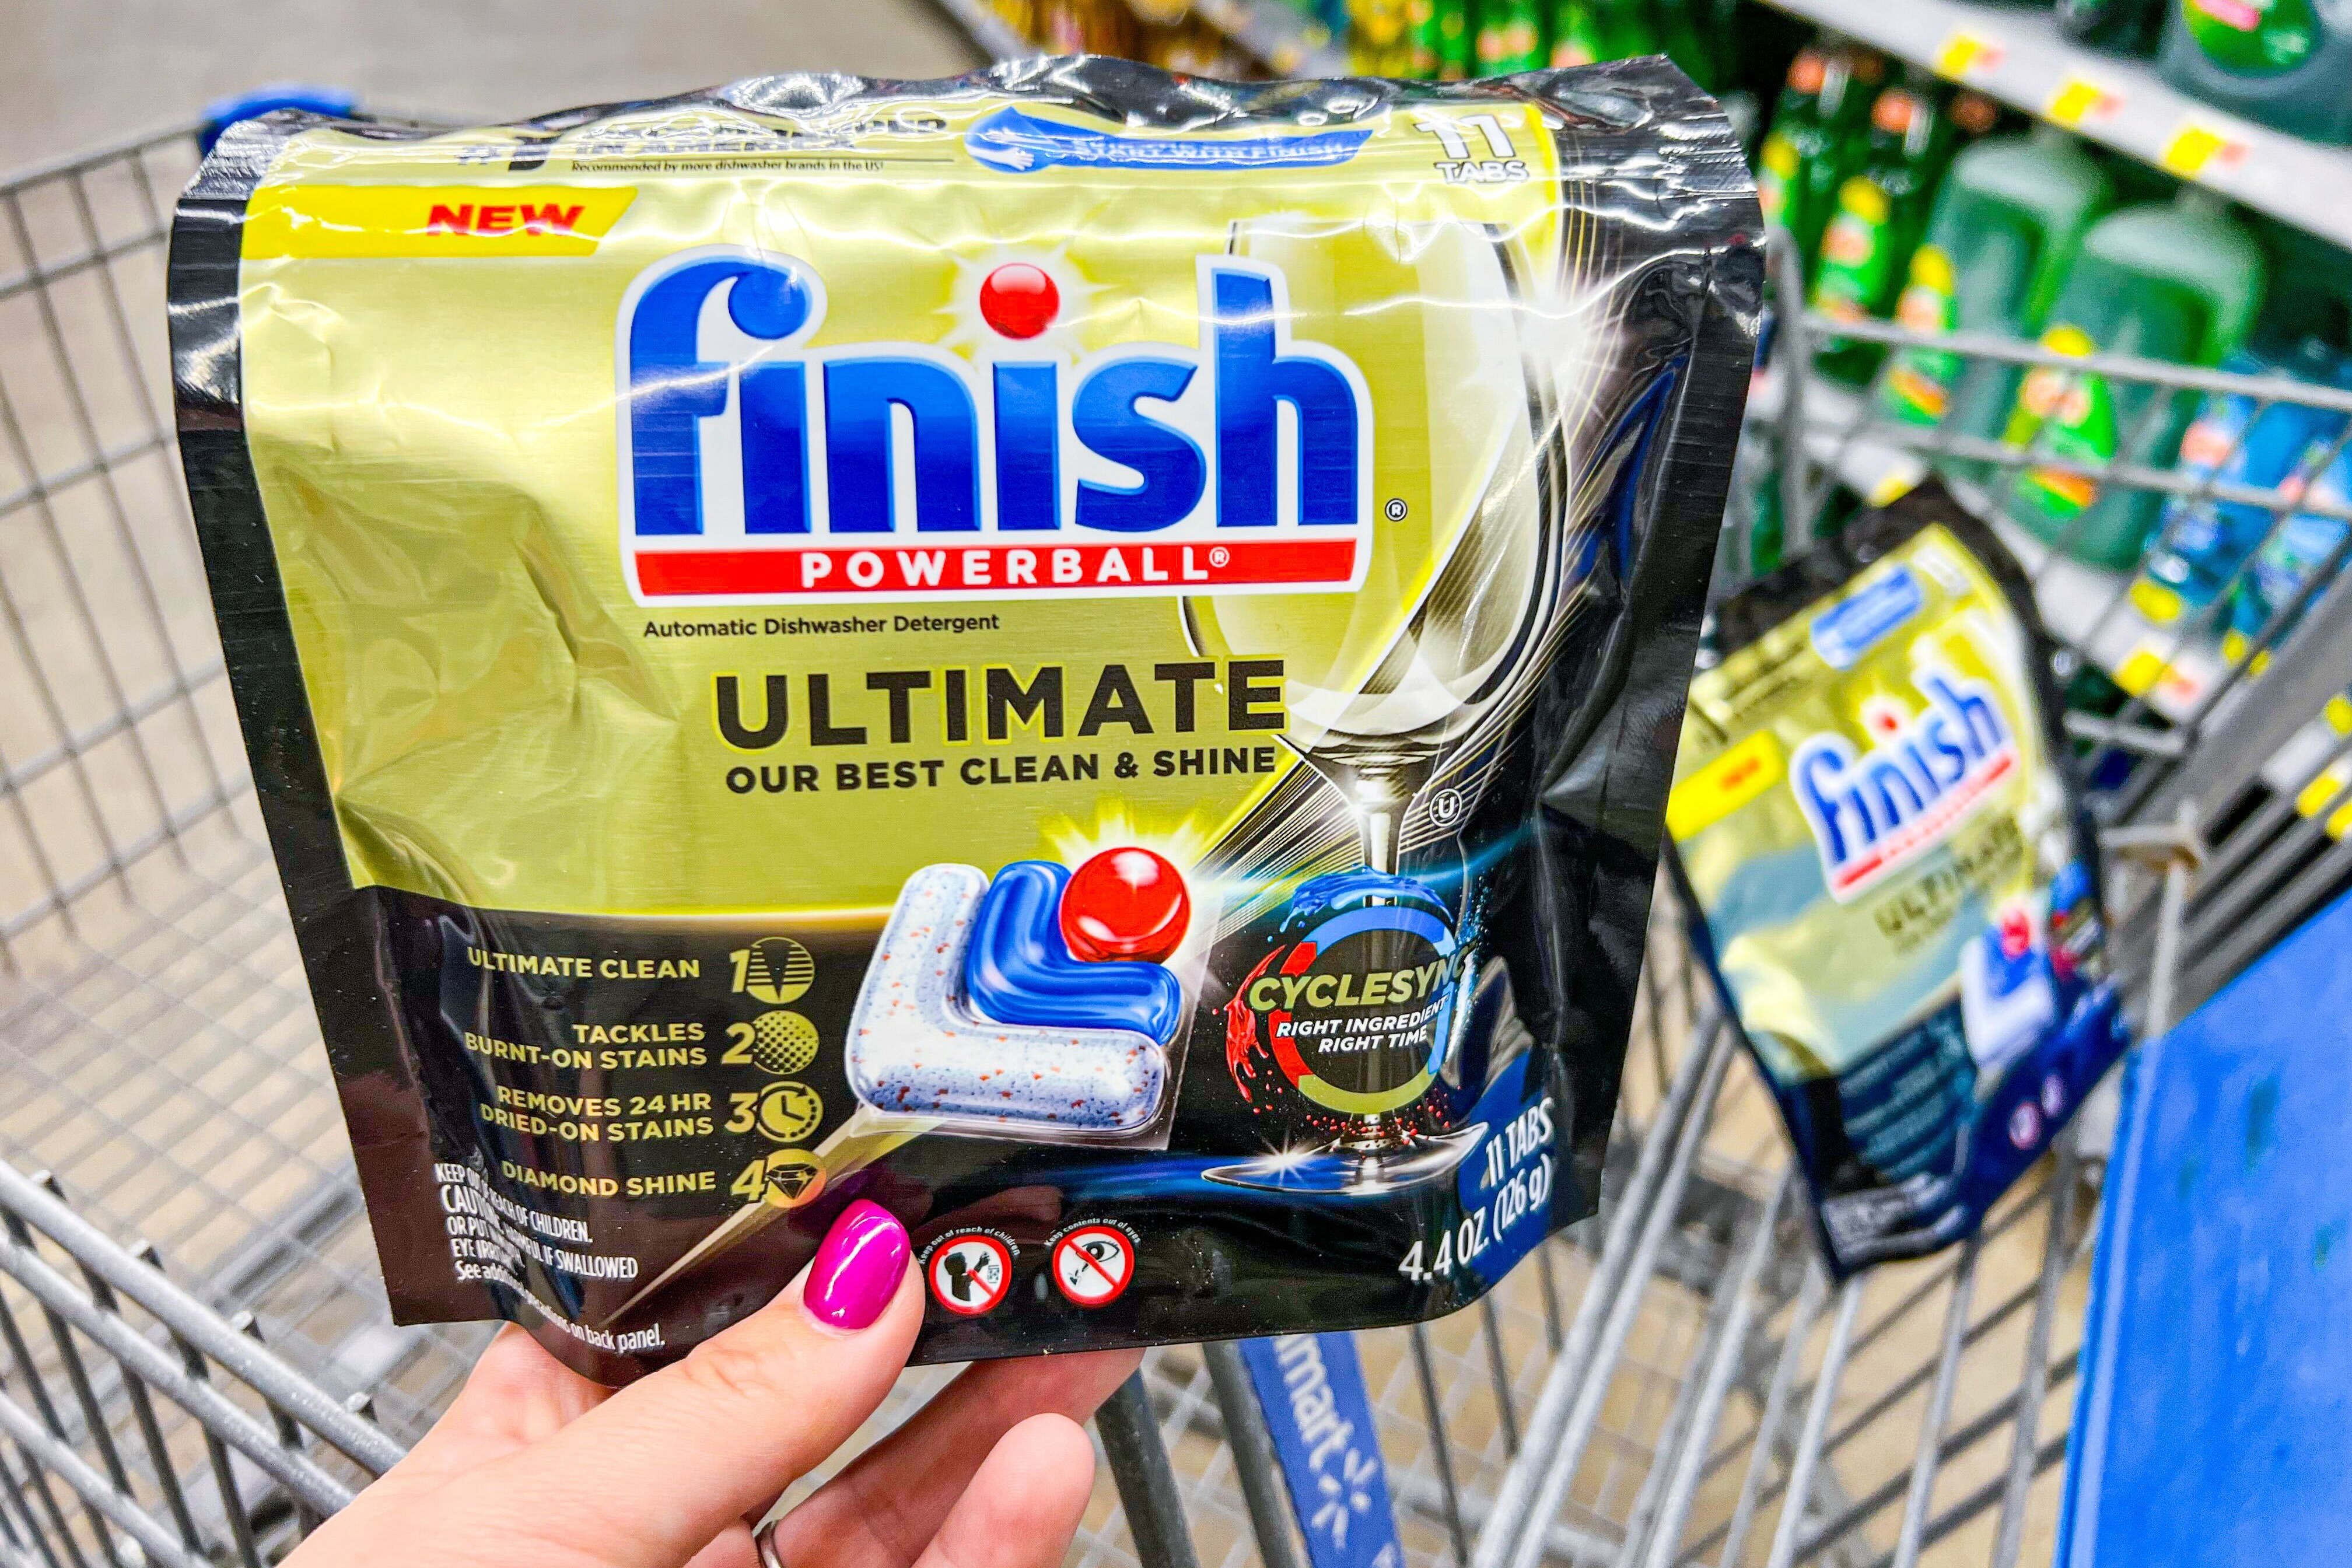 Finish dishwasher tablets half-price thanks to Prime Day